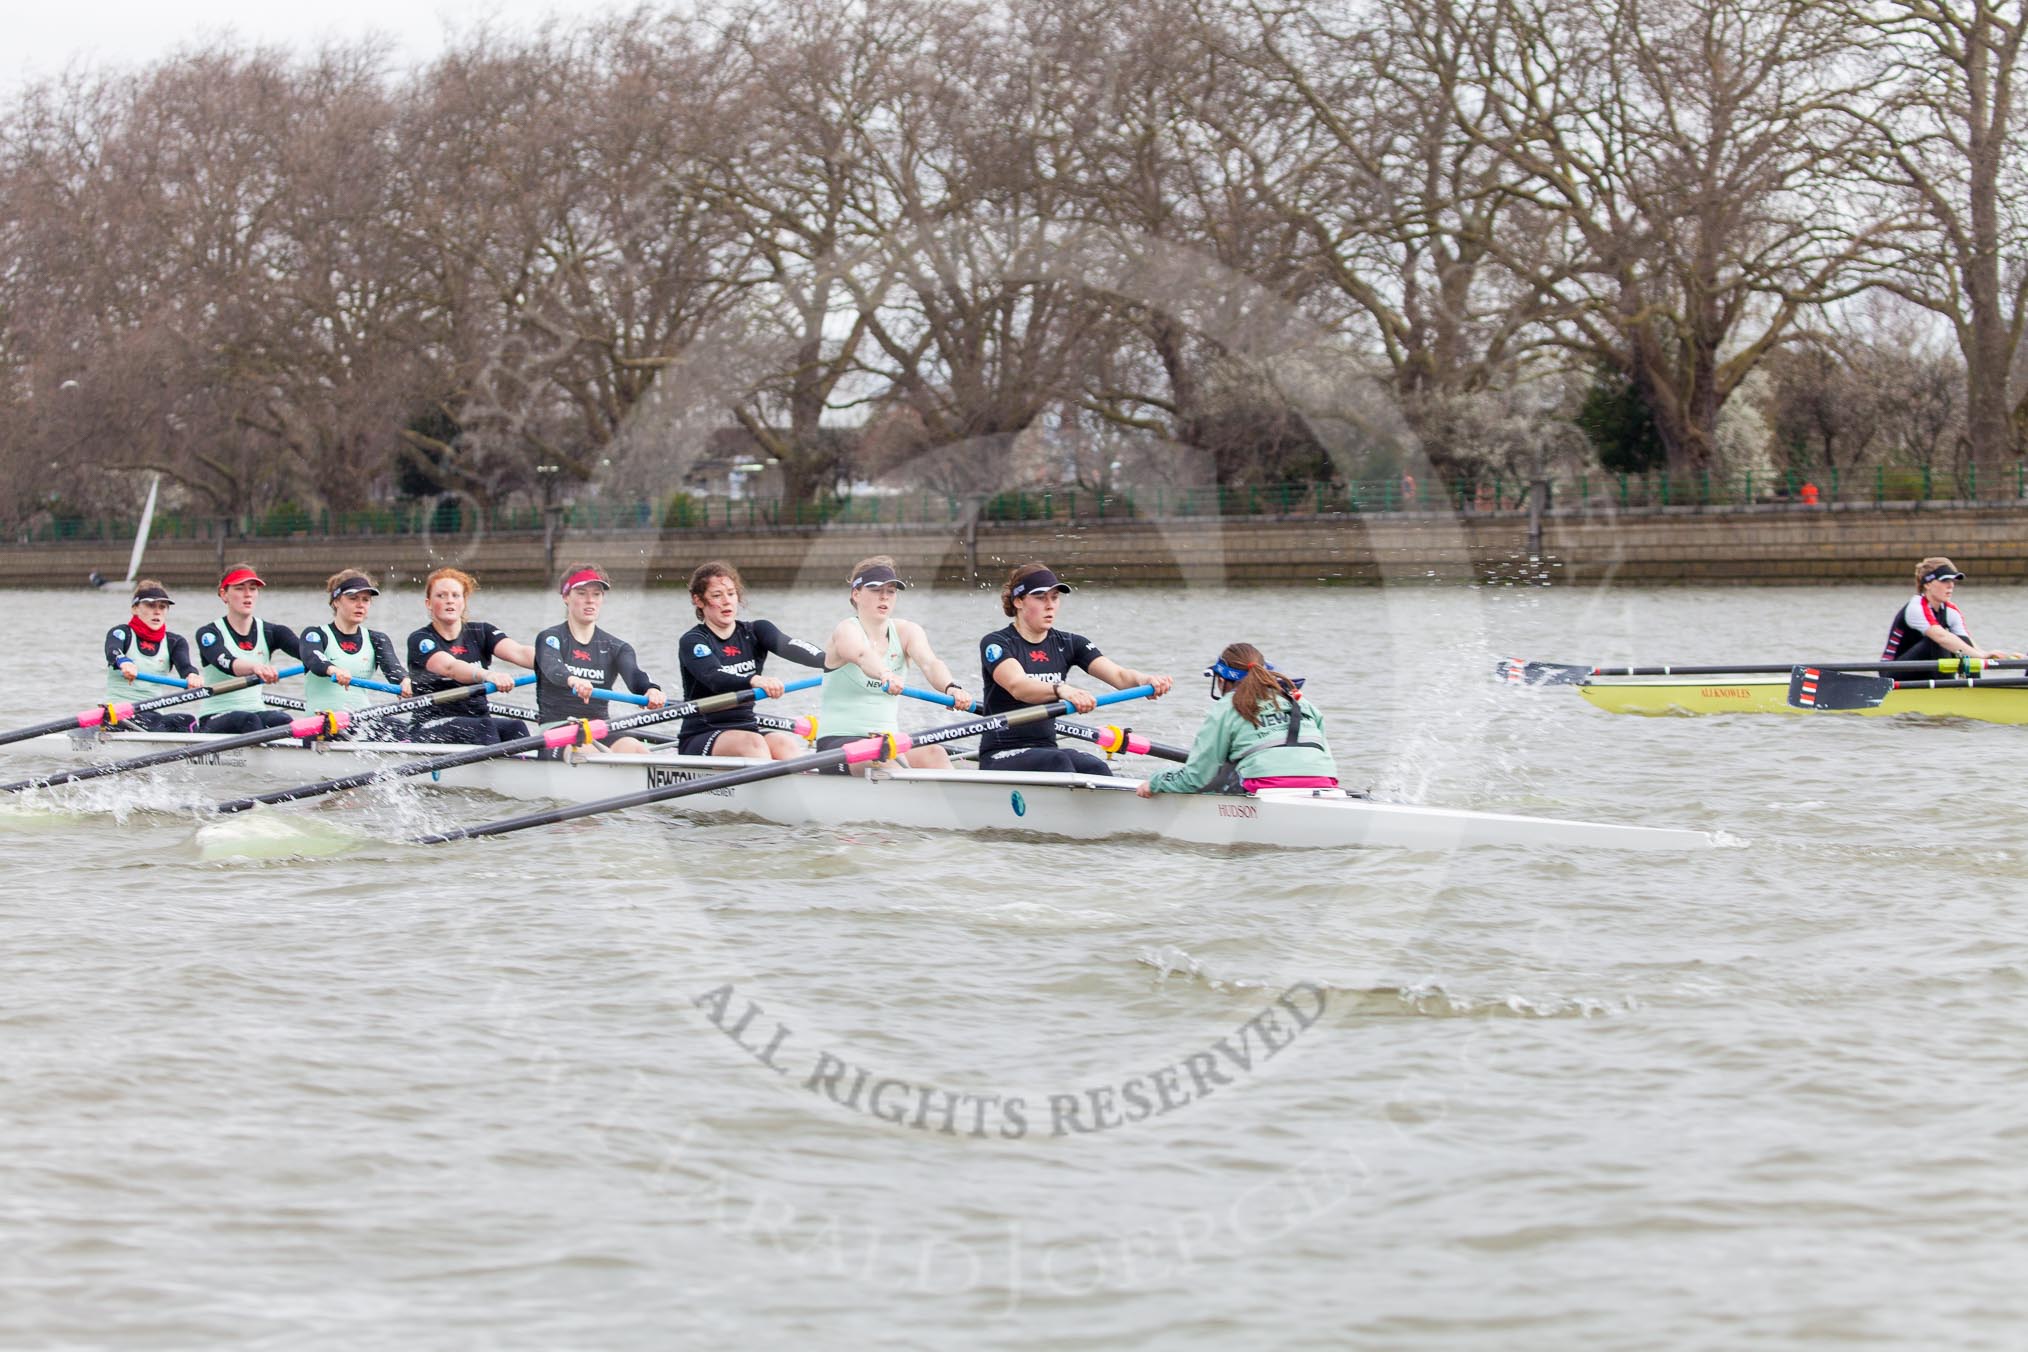 The Boat Race season 2014 - fixture CUWBC vs Thames RC.




on 02 March 2014 at 13:57, image #139